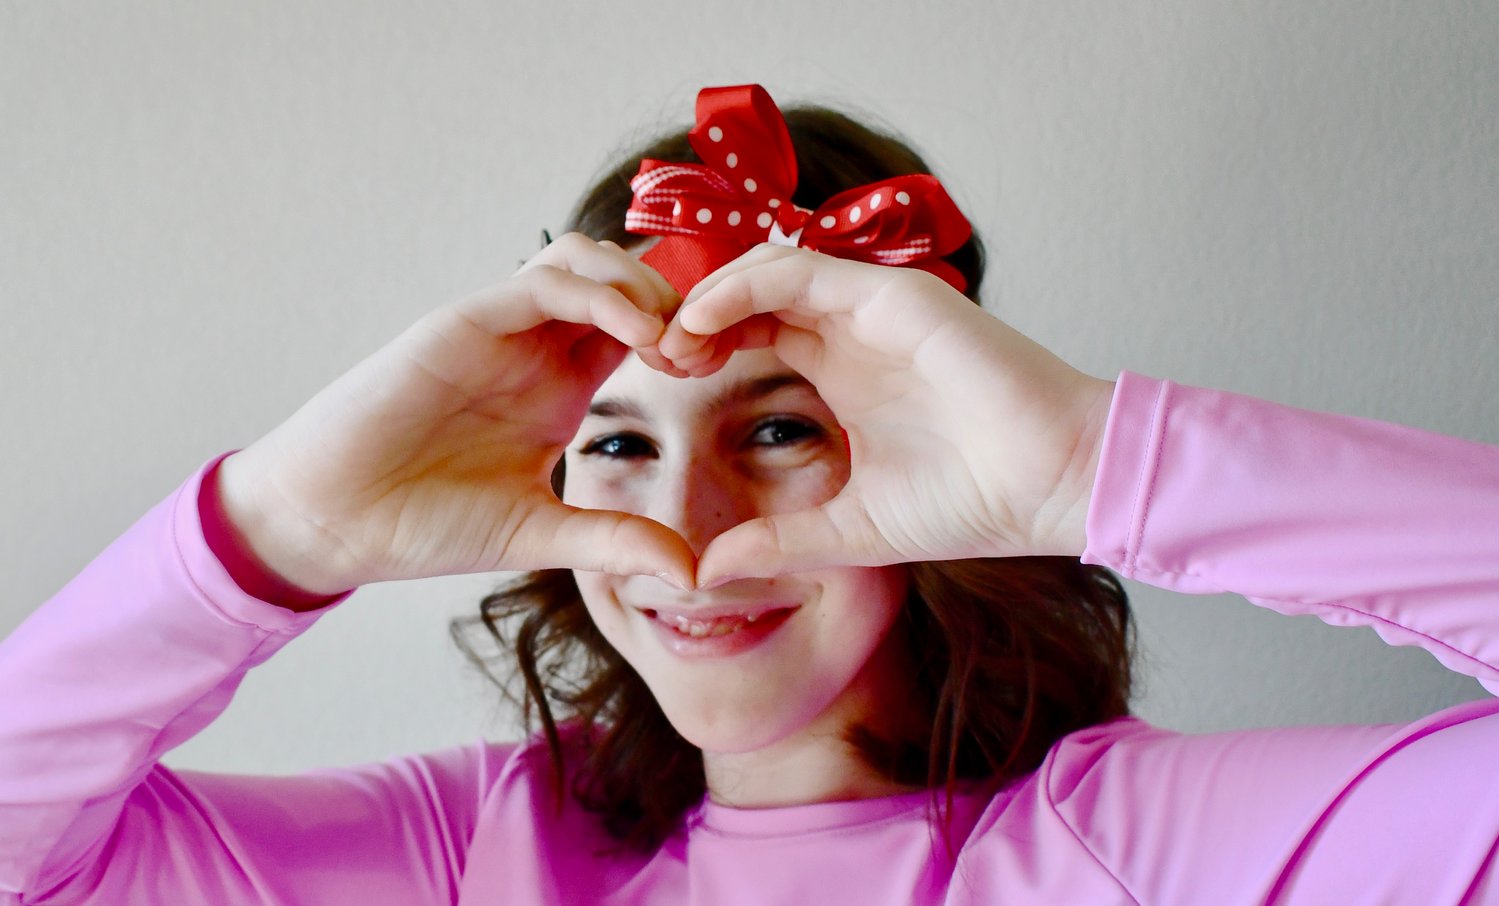 As Valentine's Day approaches, Bolivar’s Mya Reichert strikes a festive pose Thursday, Feb. 10 — reminding us all that on heart day and everyday, love lives here.